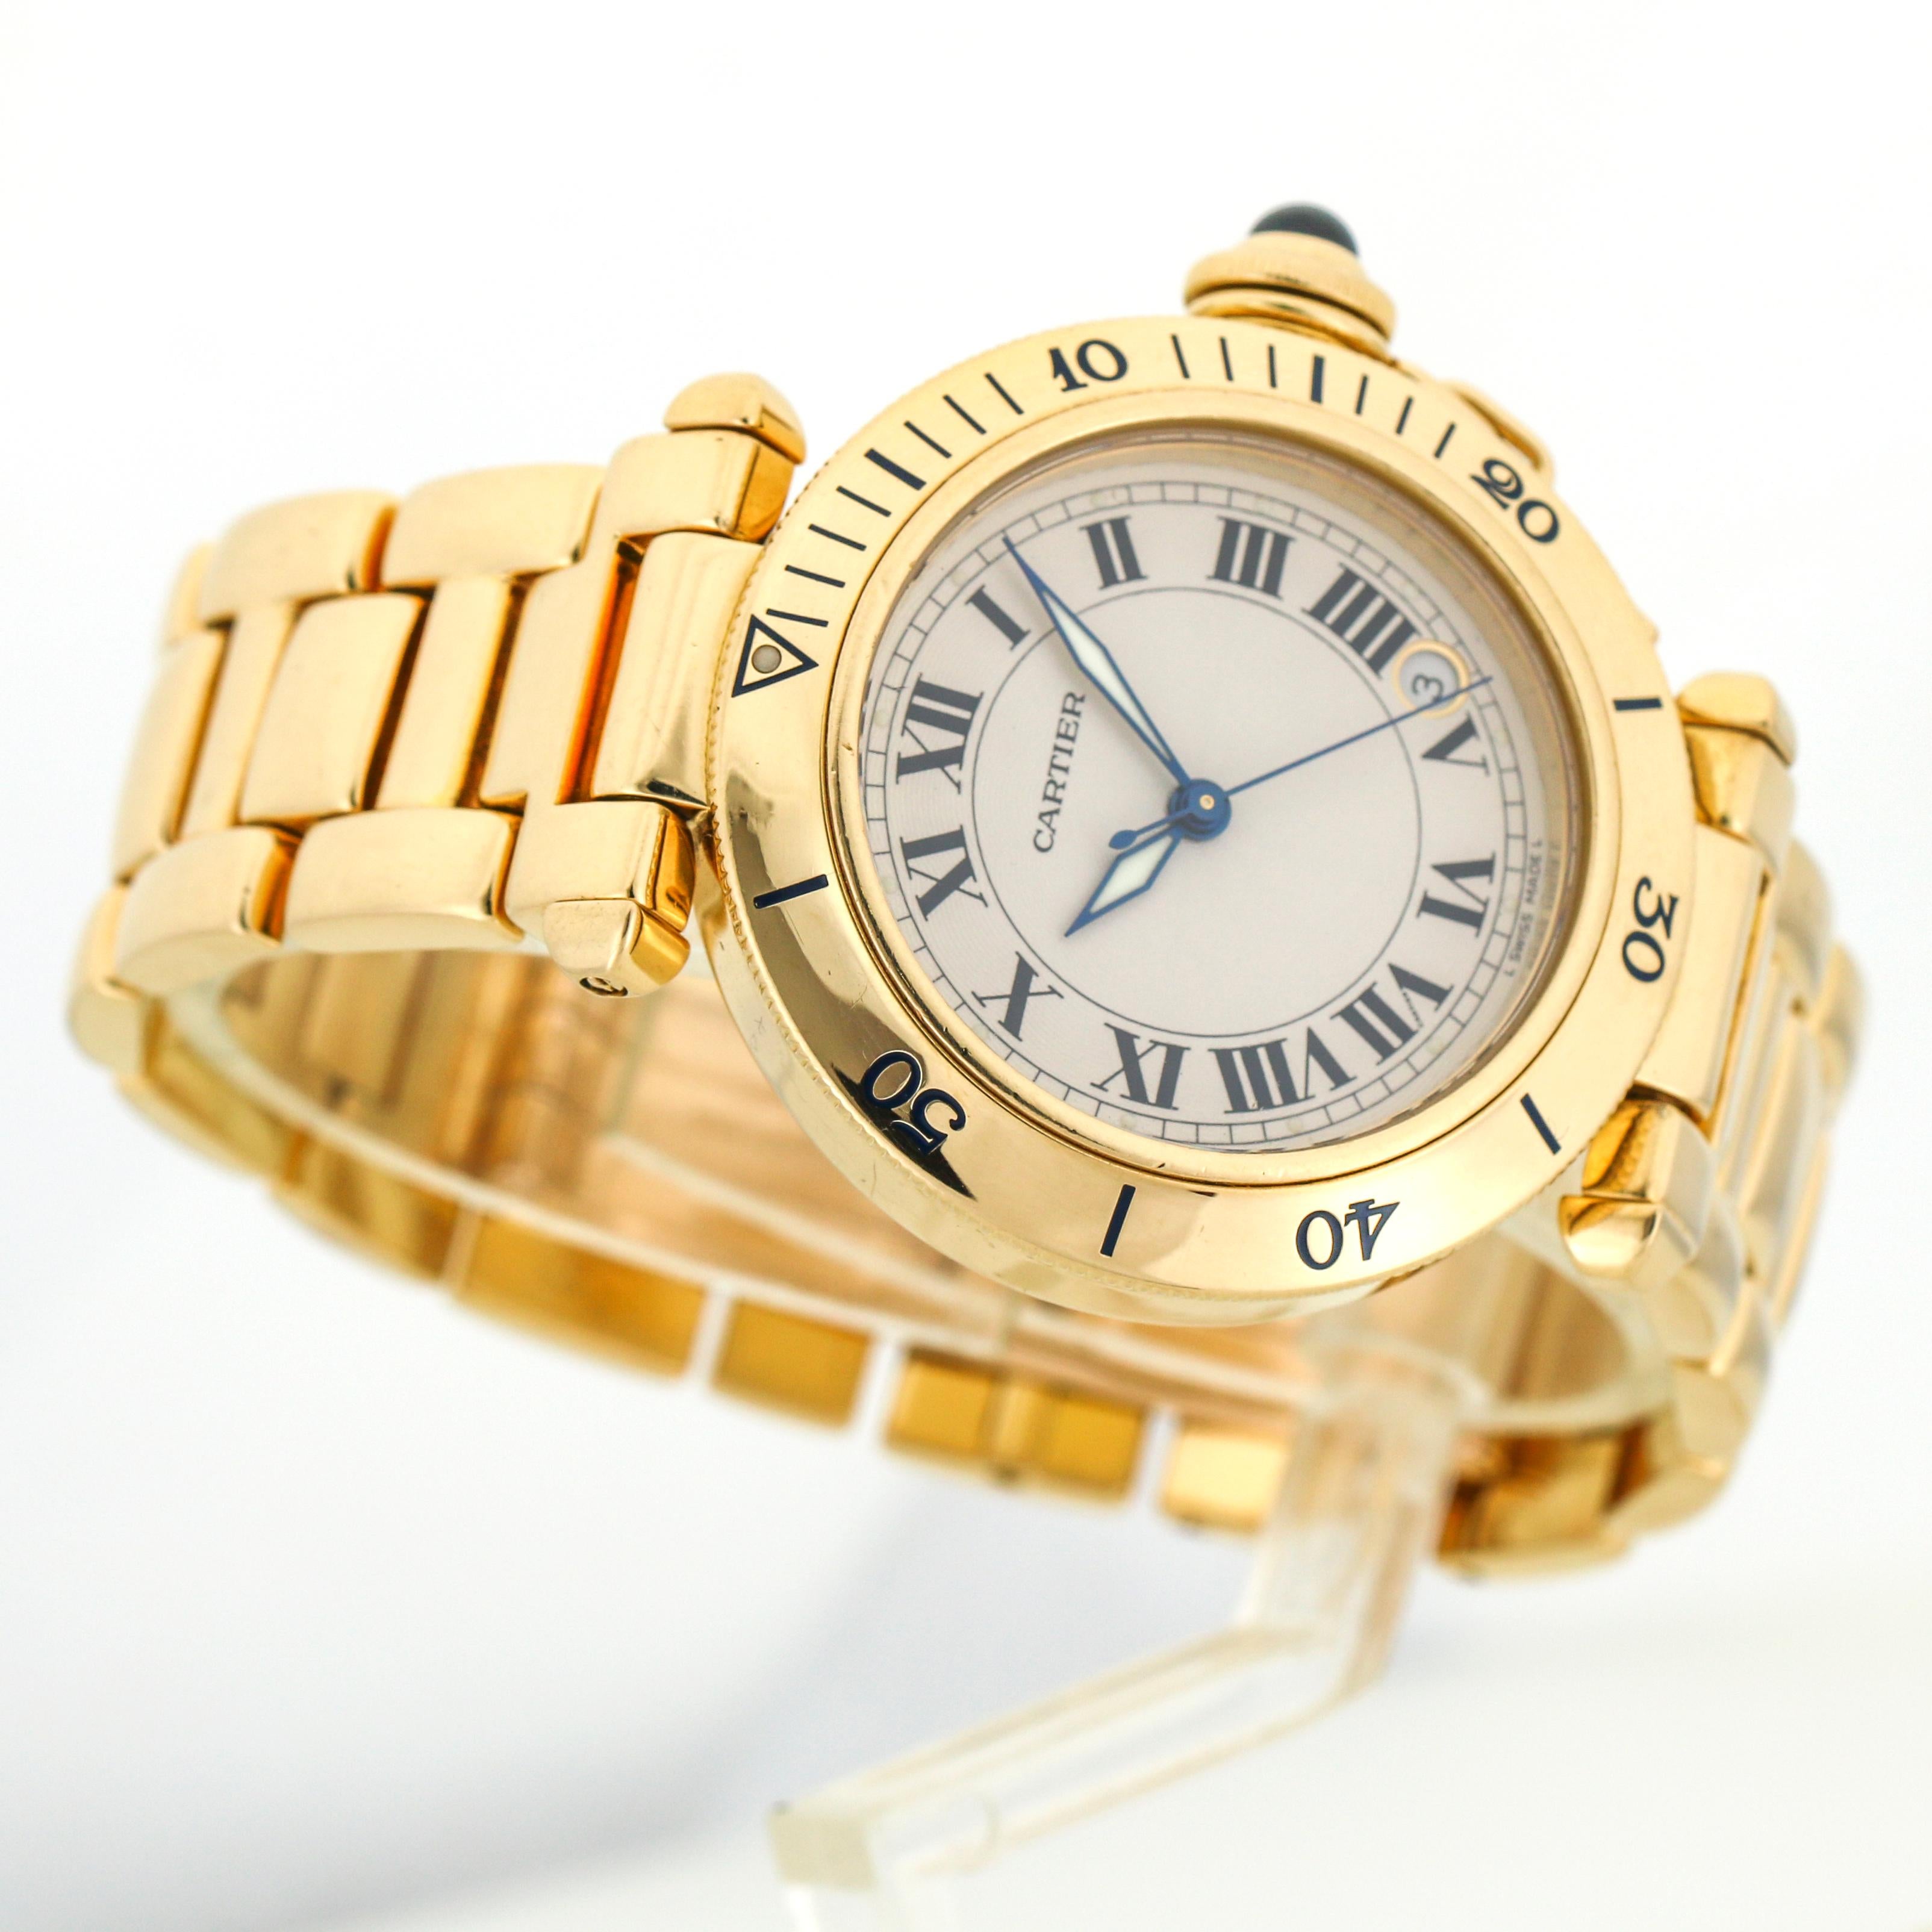 Cartier Pasha 1035 watch in 18-karat yellow gold. Polished metal case and bracelet. White dial with black Roman numeral hour marker's and Cartier's signature luminescent sword hands. Date window between 4 and 5 o'clock positions. Screw crown. Double